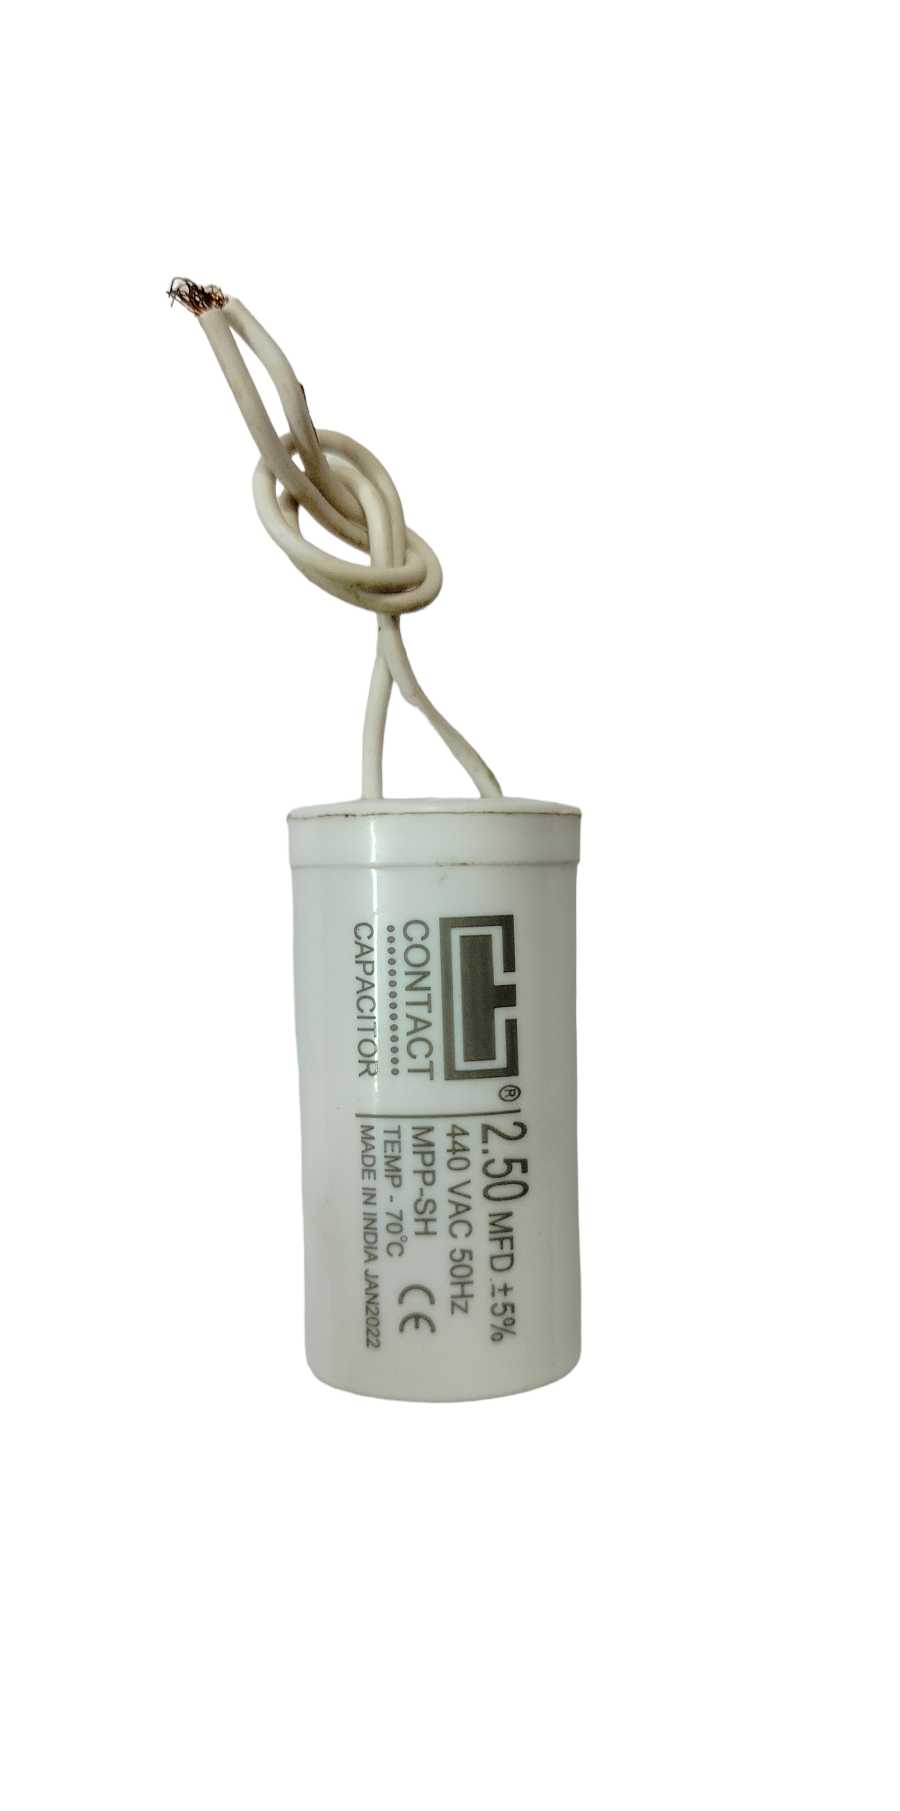 Contact Capacitor 2.50 MFD Supplier in jharkhand